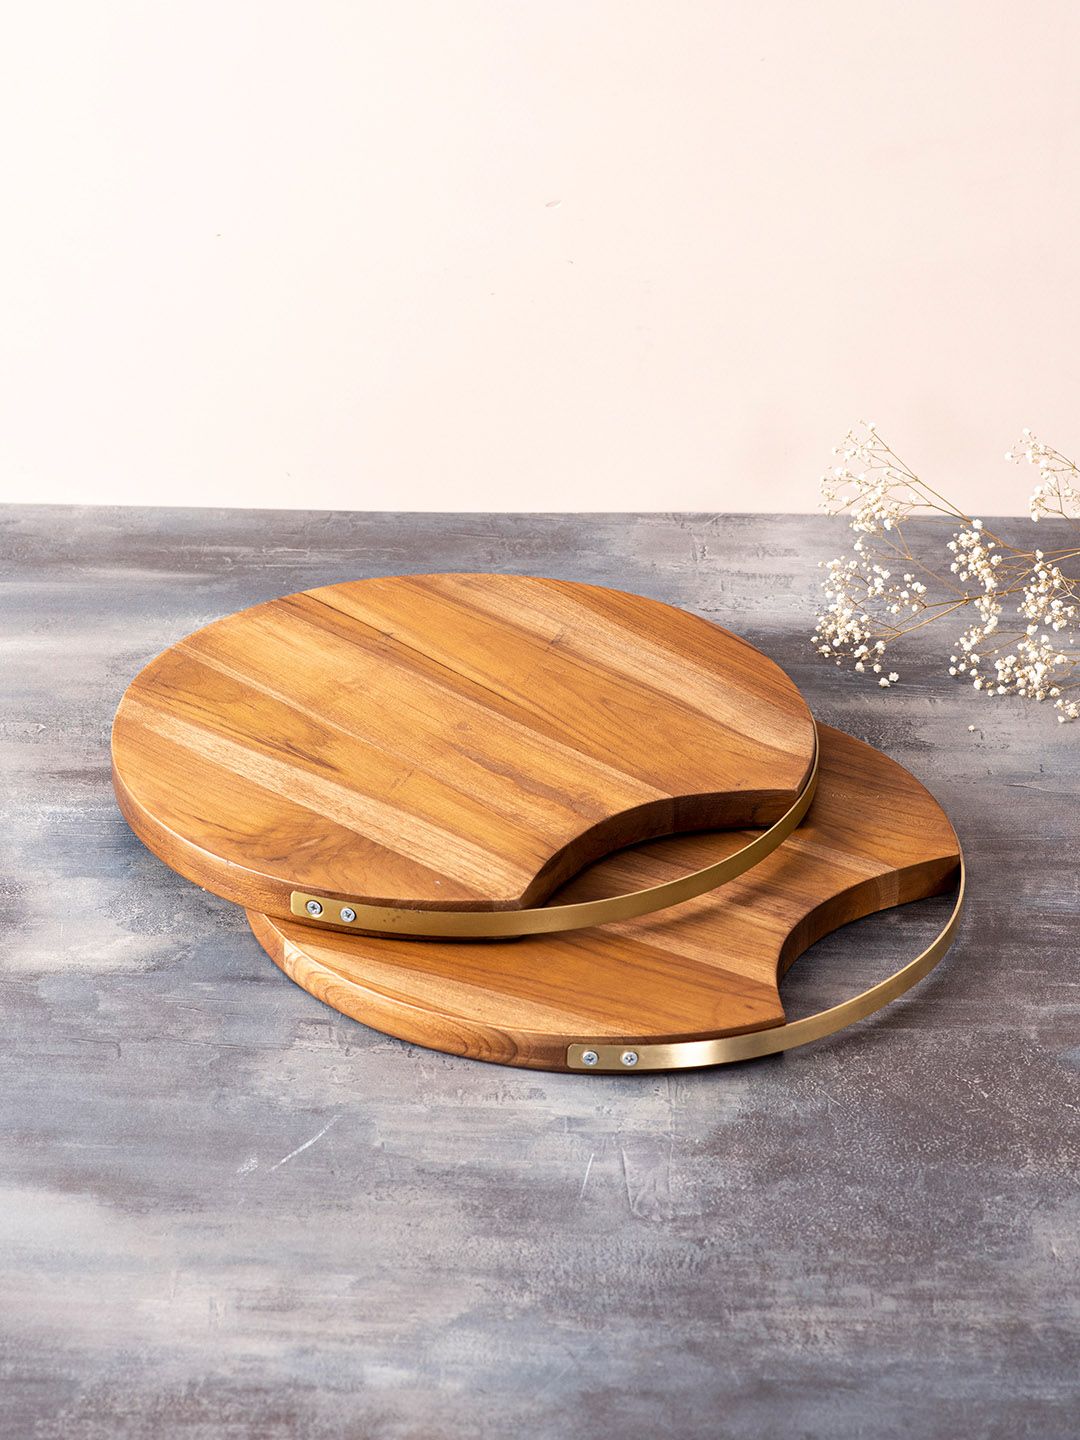 nestroots Set of 2 Wooden Handcrafted Serving Platter Price in India